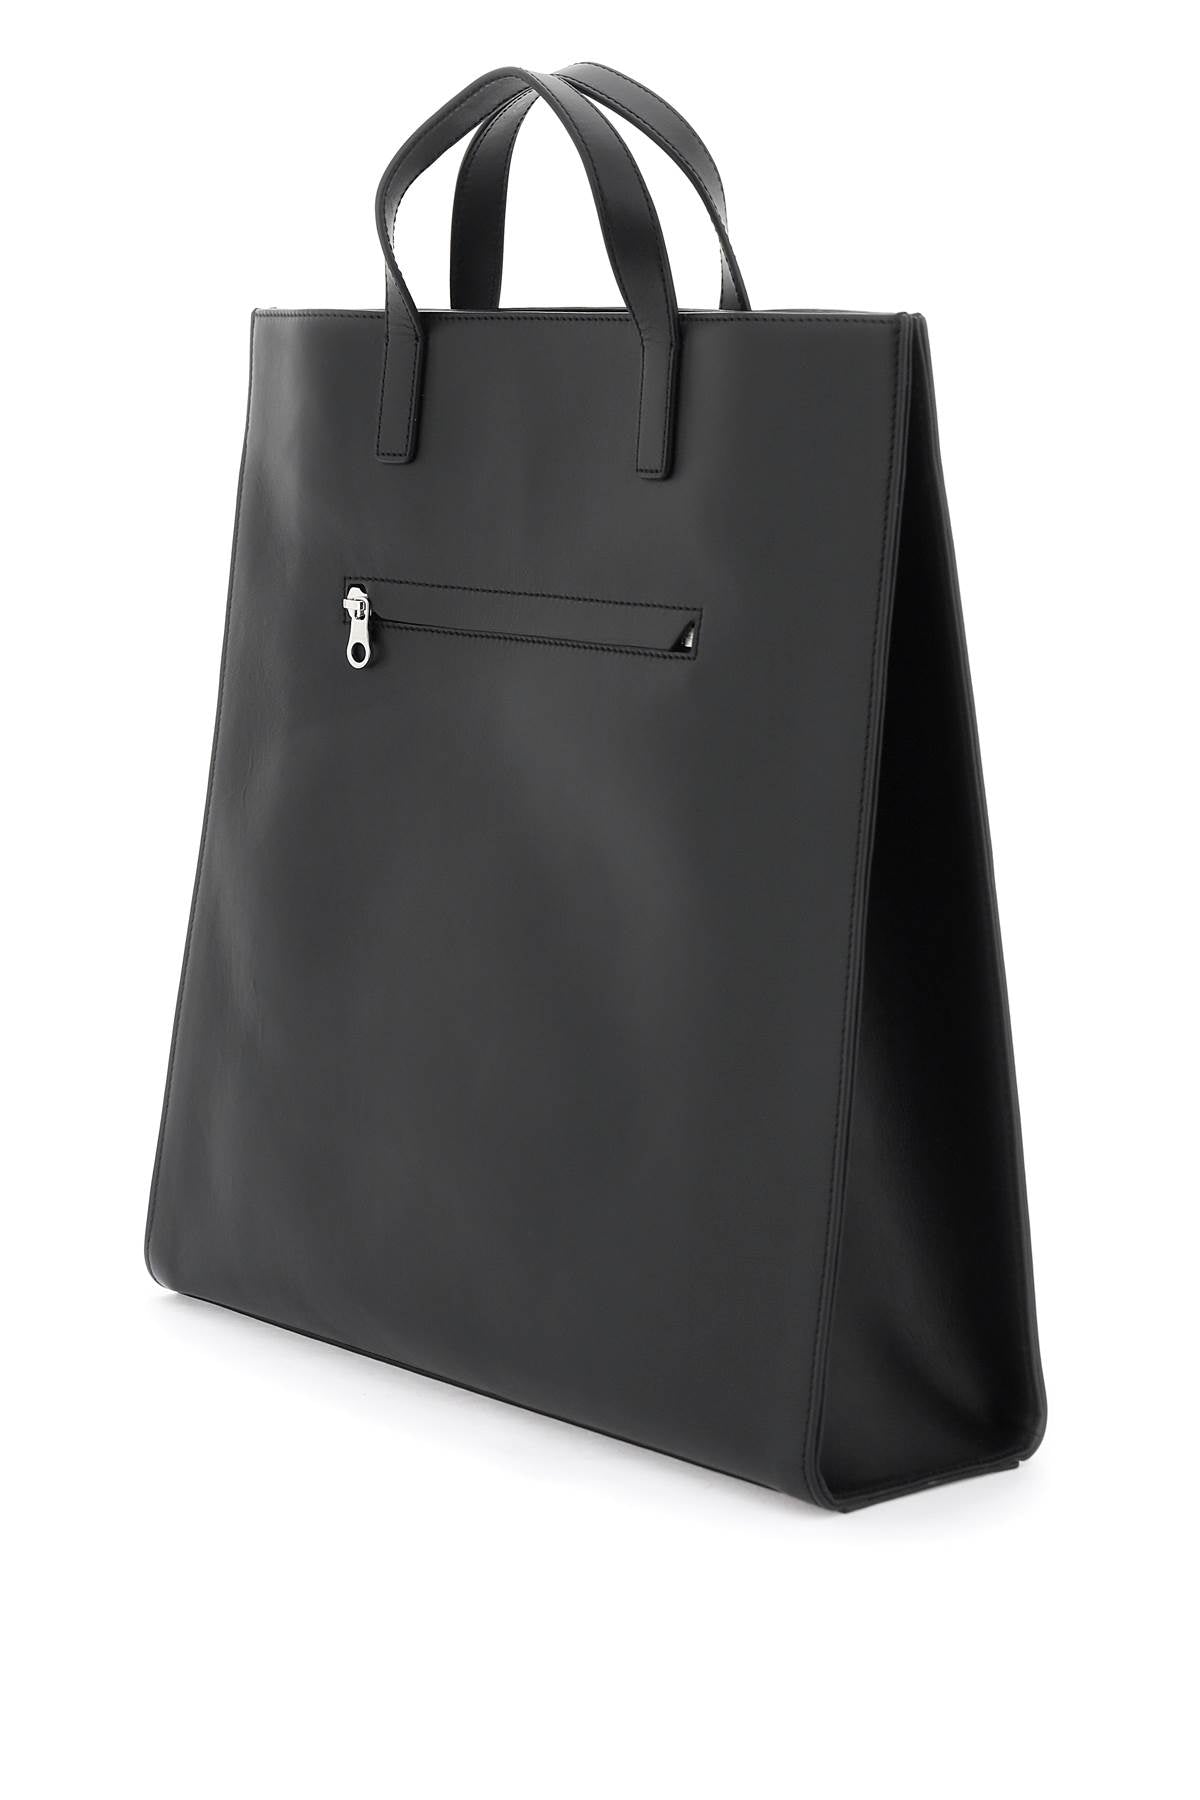 Courreges smooth leather heritage tote bag in 9-1